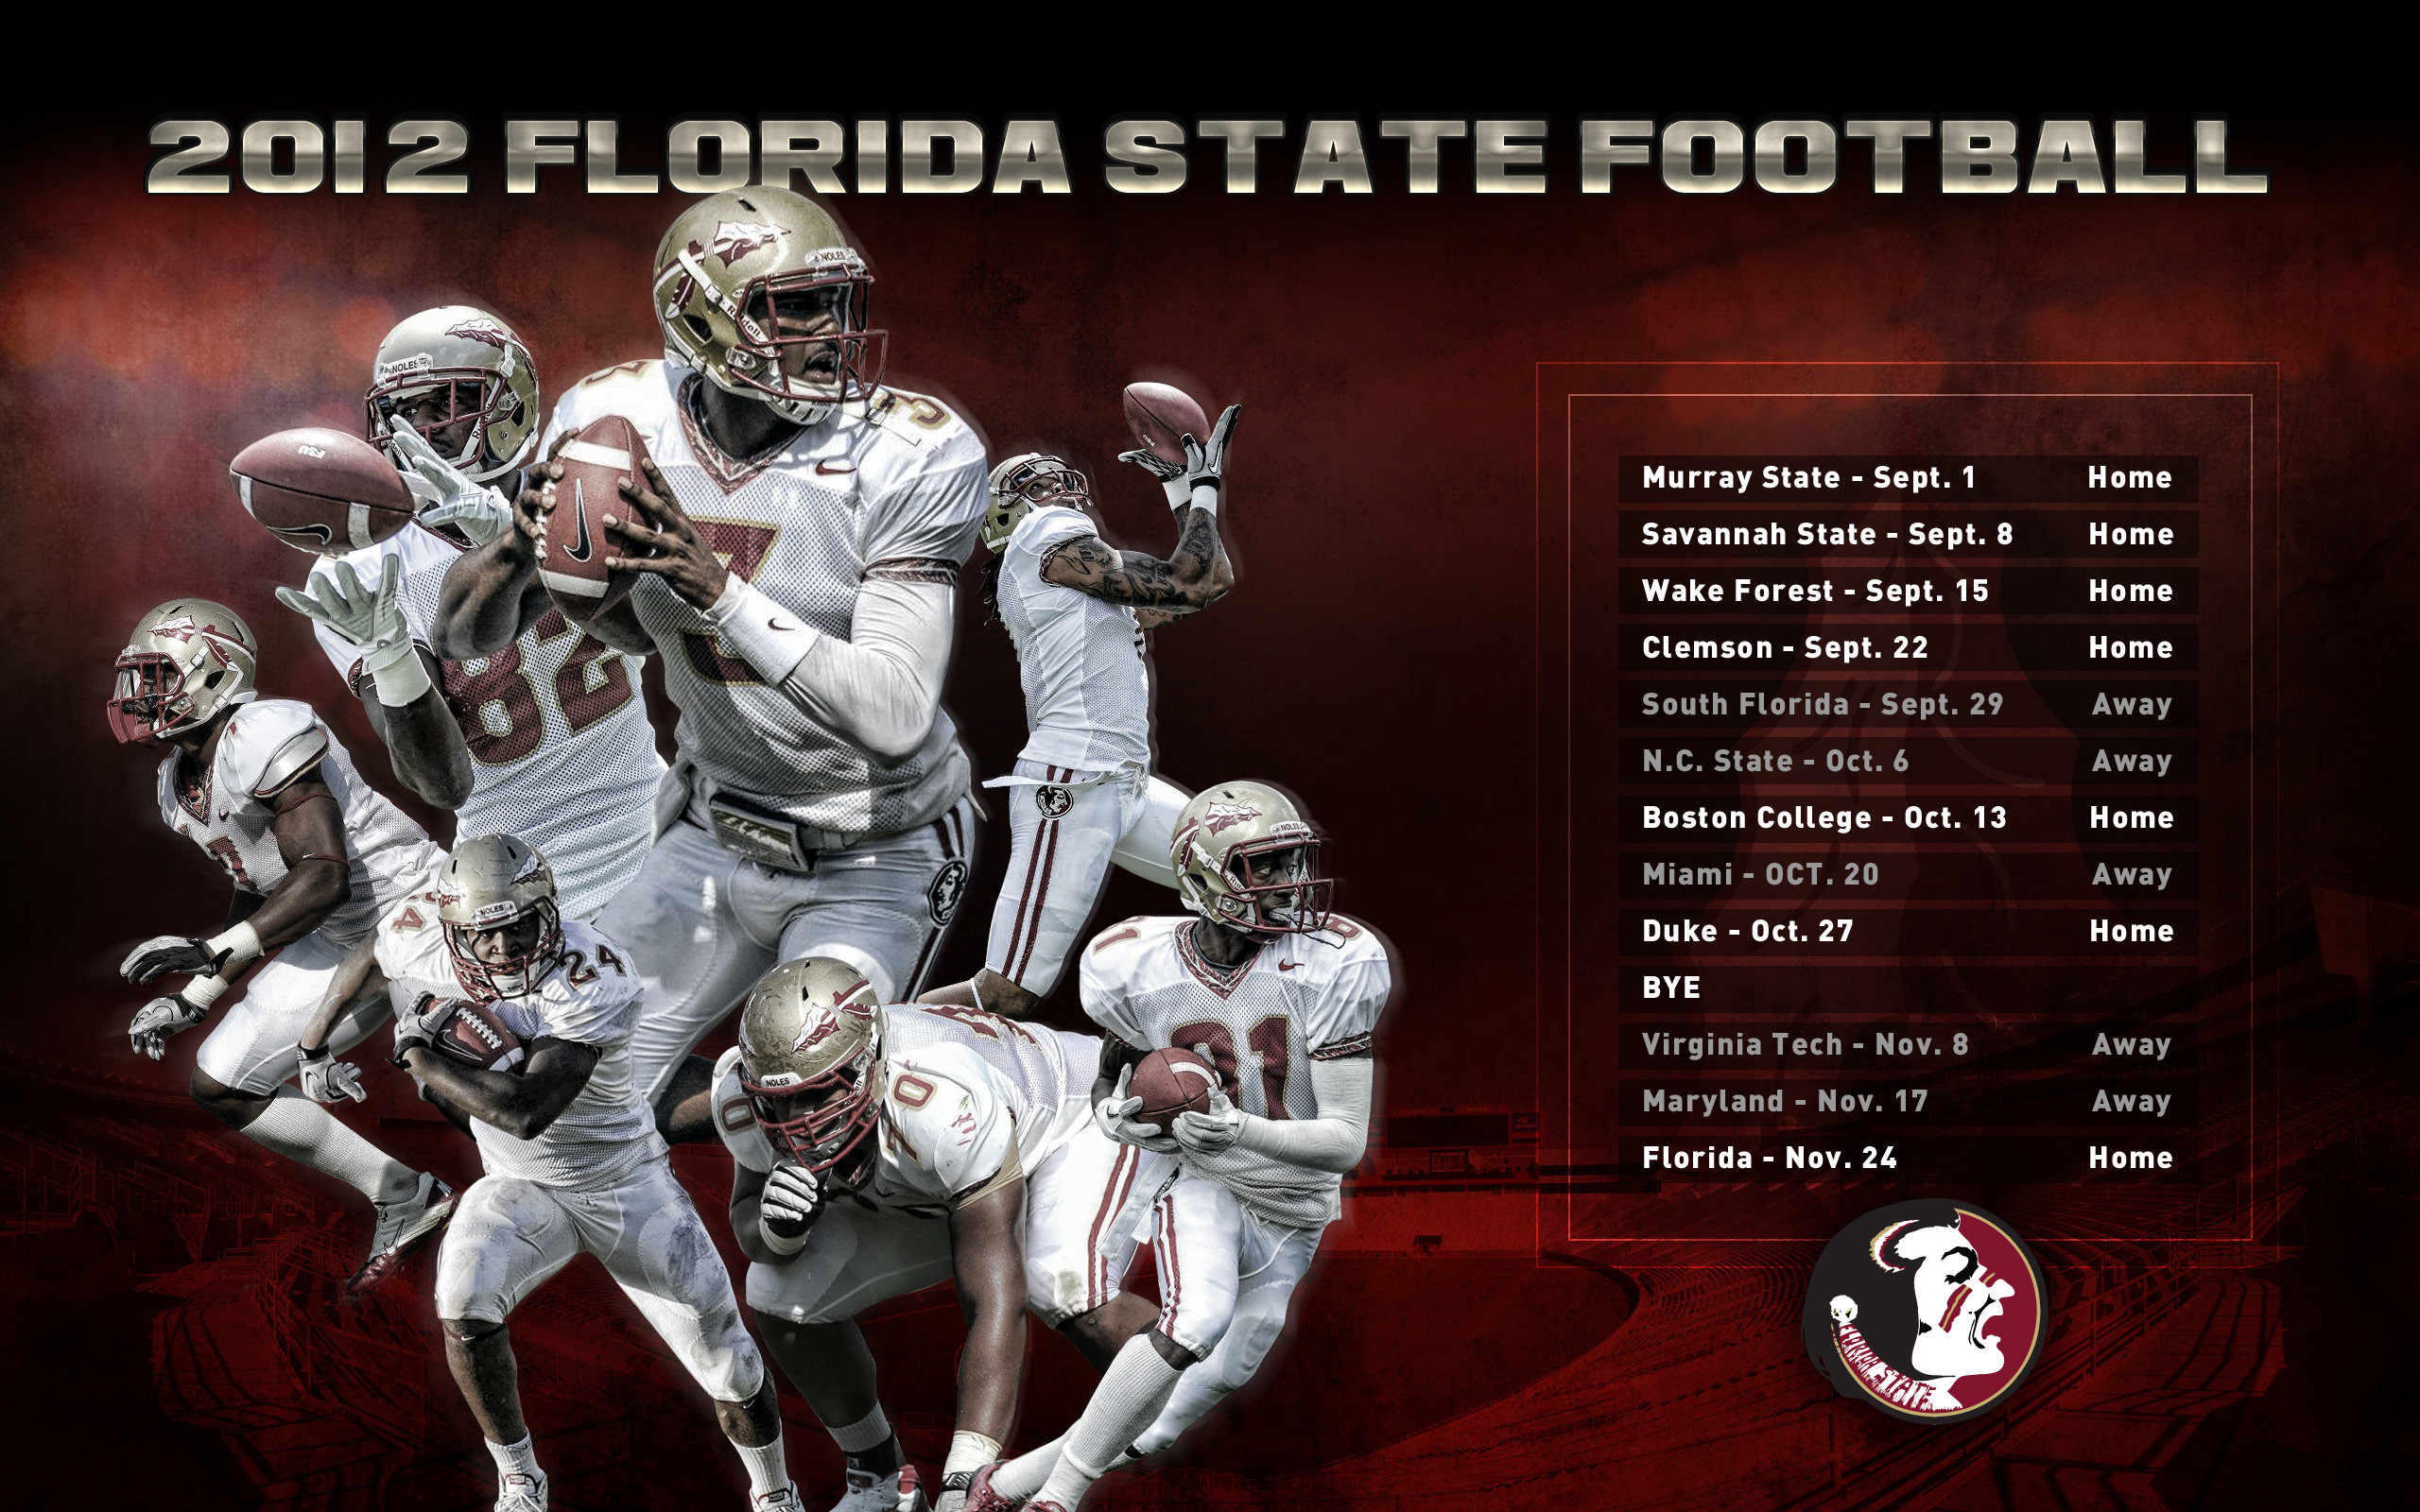 2560x1600 Collection of Florida State Football Wallpapers on HDWallpapers